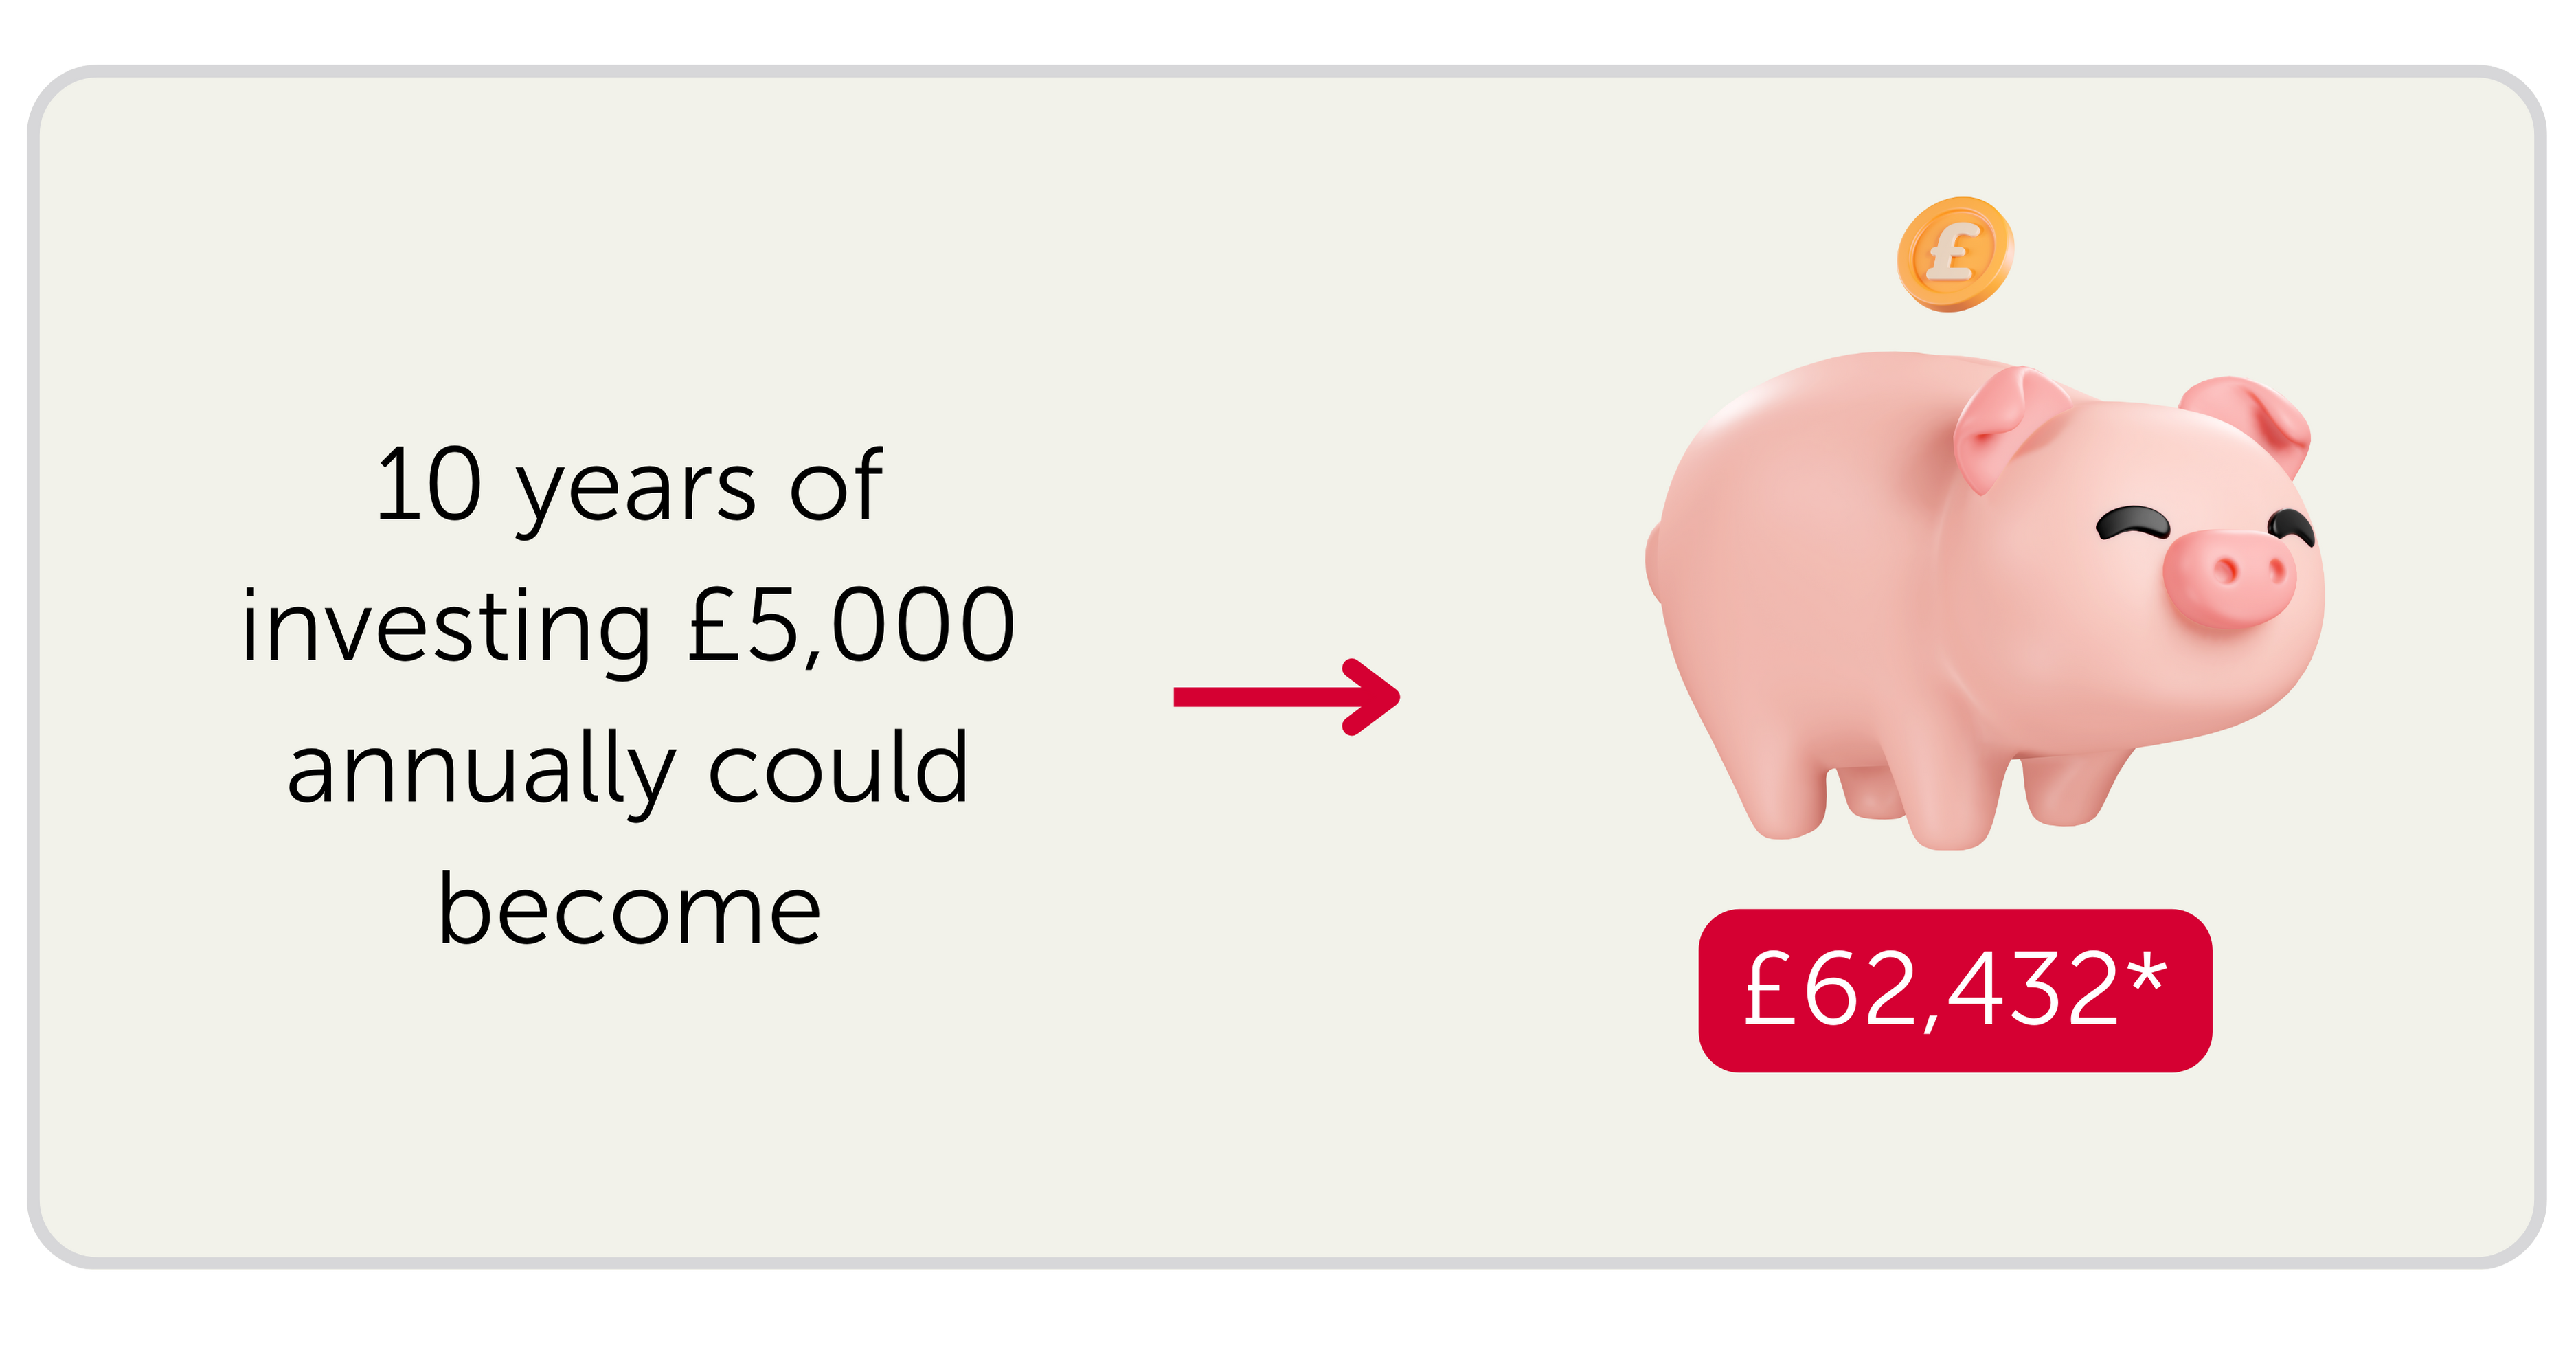 10 years of investing £5,000 annually could become £62,432*